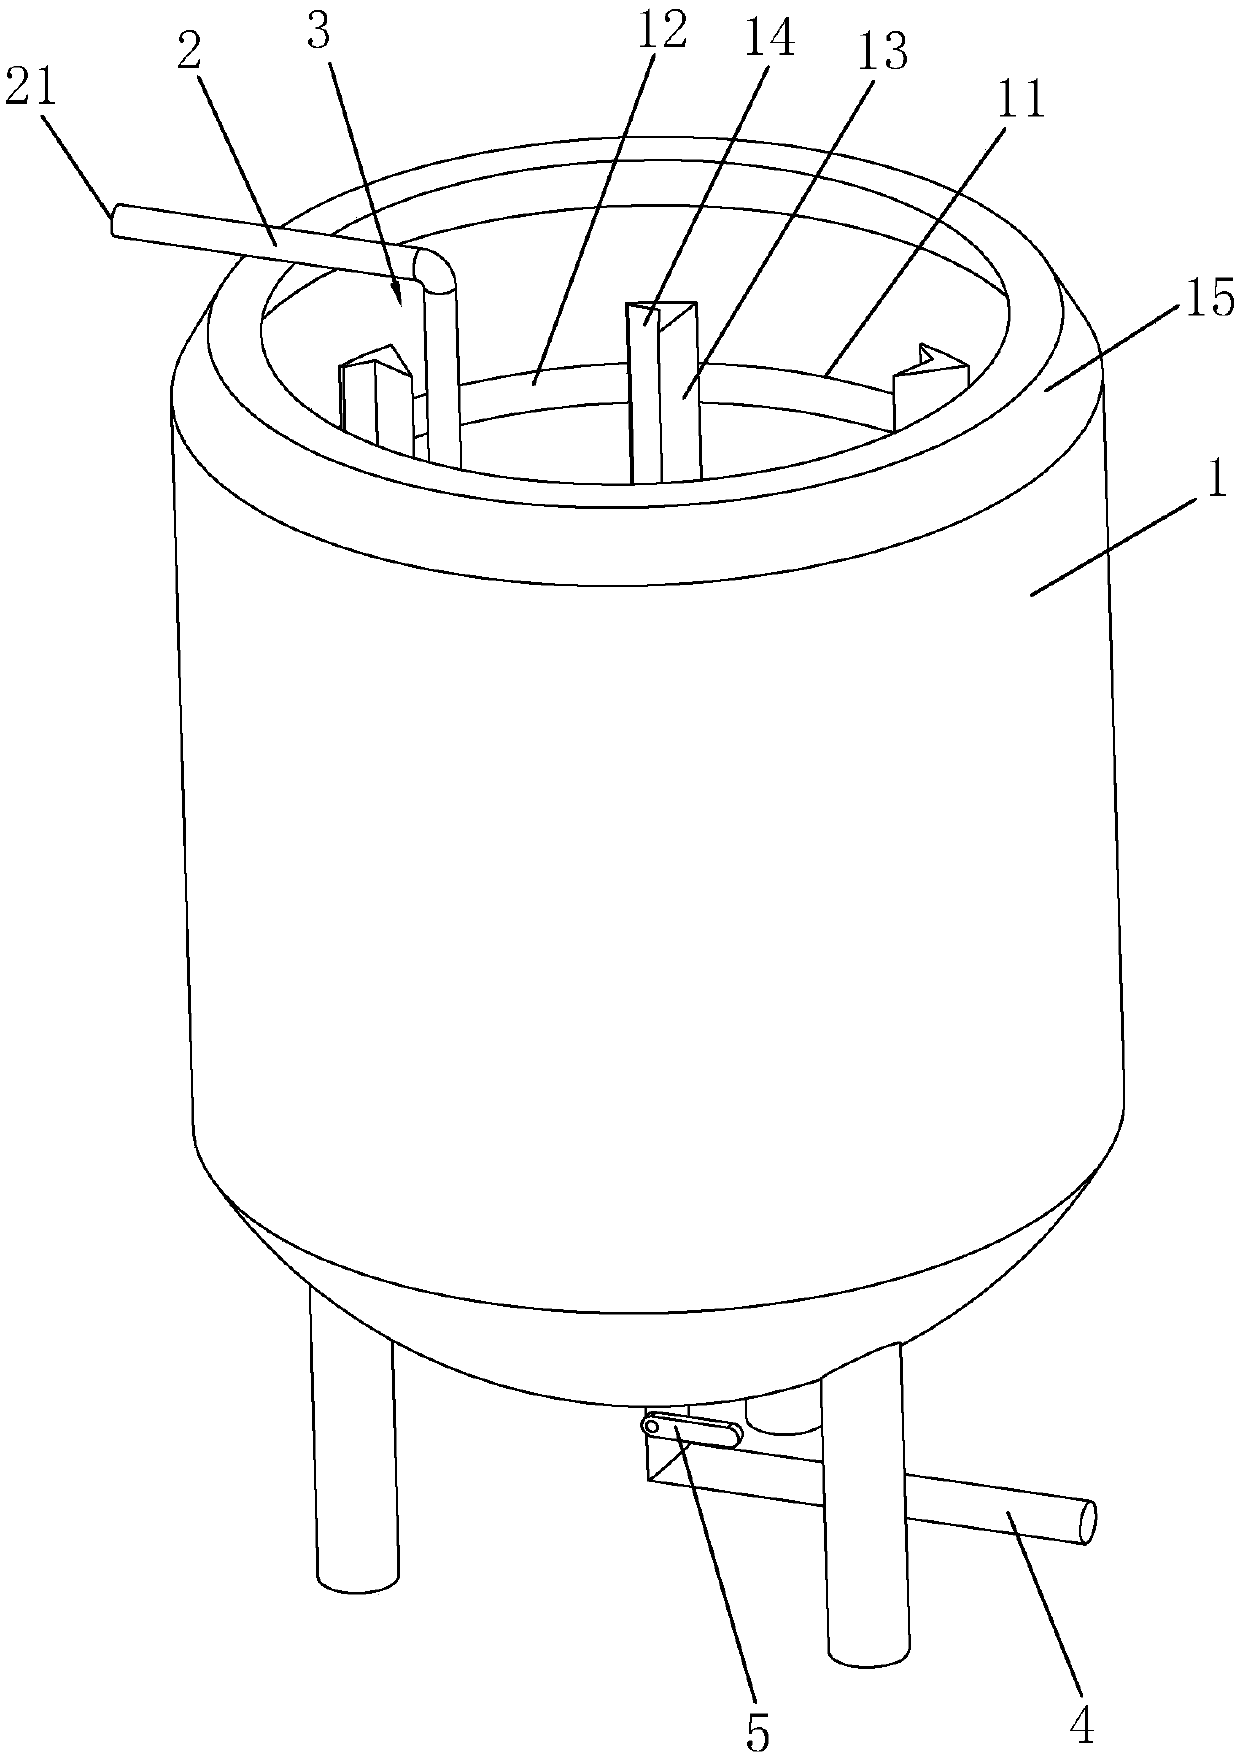 Starch pasting heating barrel